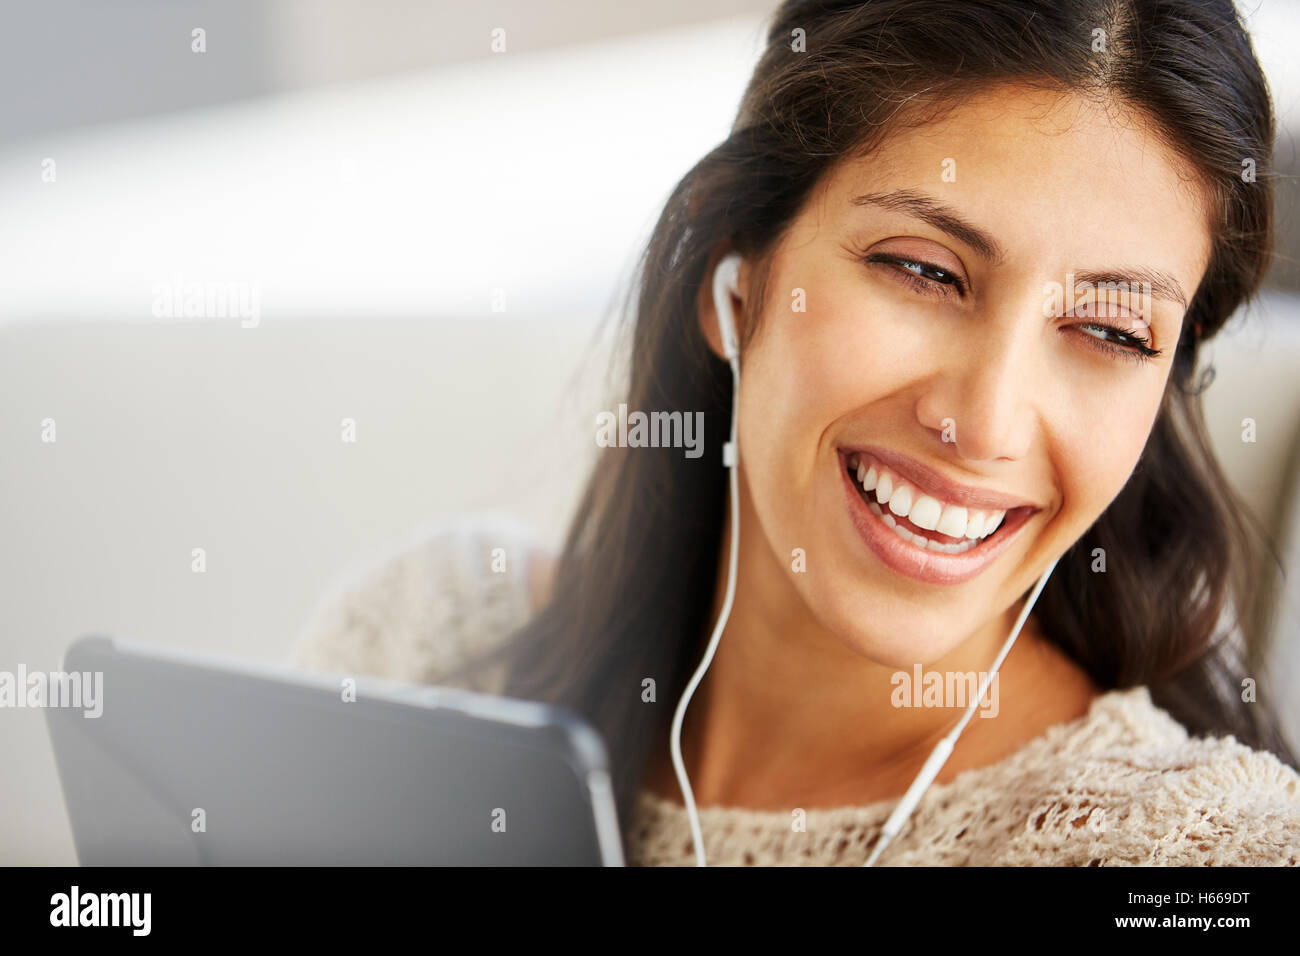 Close up smiling woman using digital tablet with headphones Stock Photo